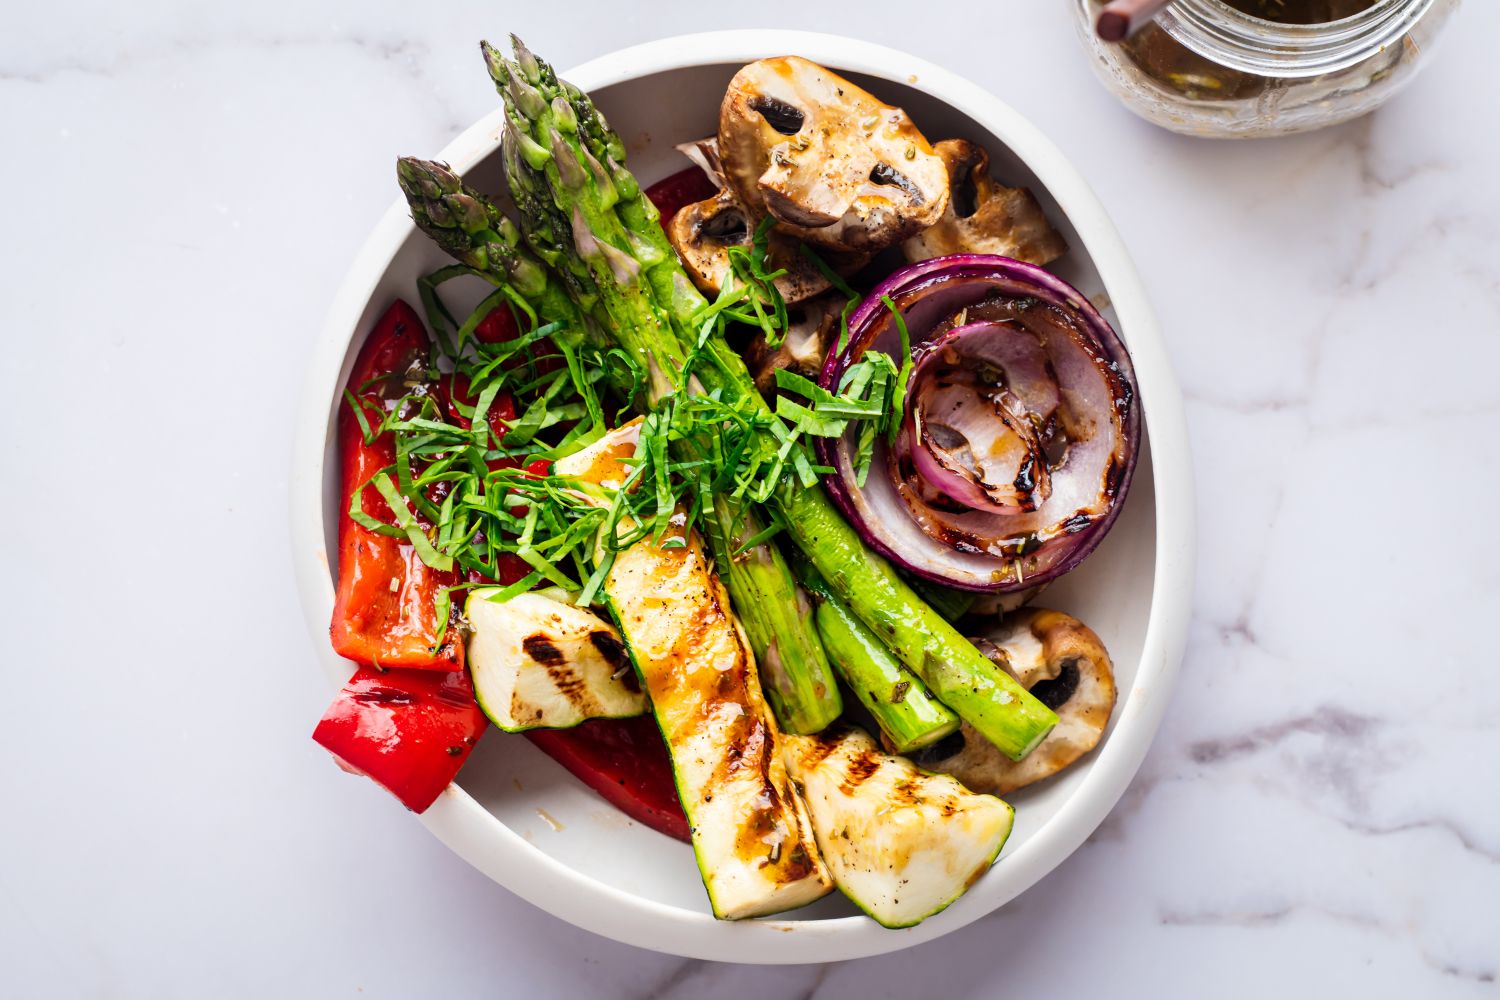 Grilled marinated vegetables including zucchini, red onion, mushroom, and asparagus.